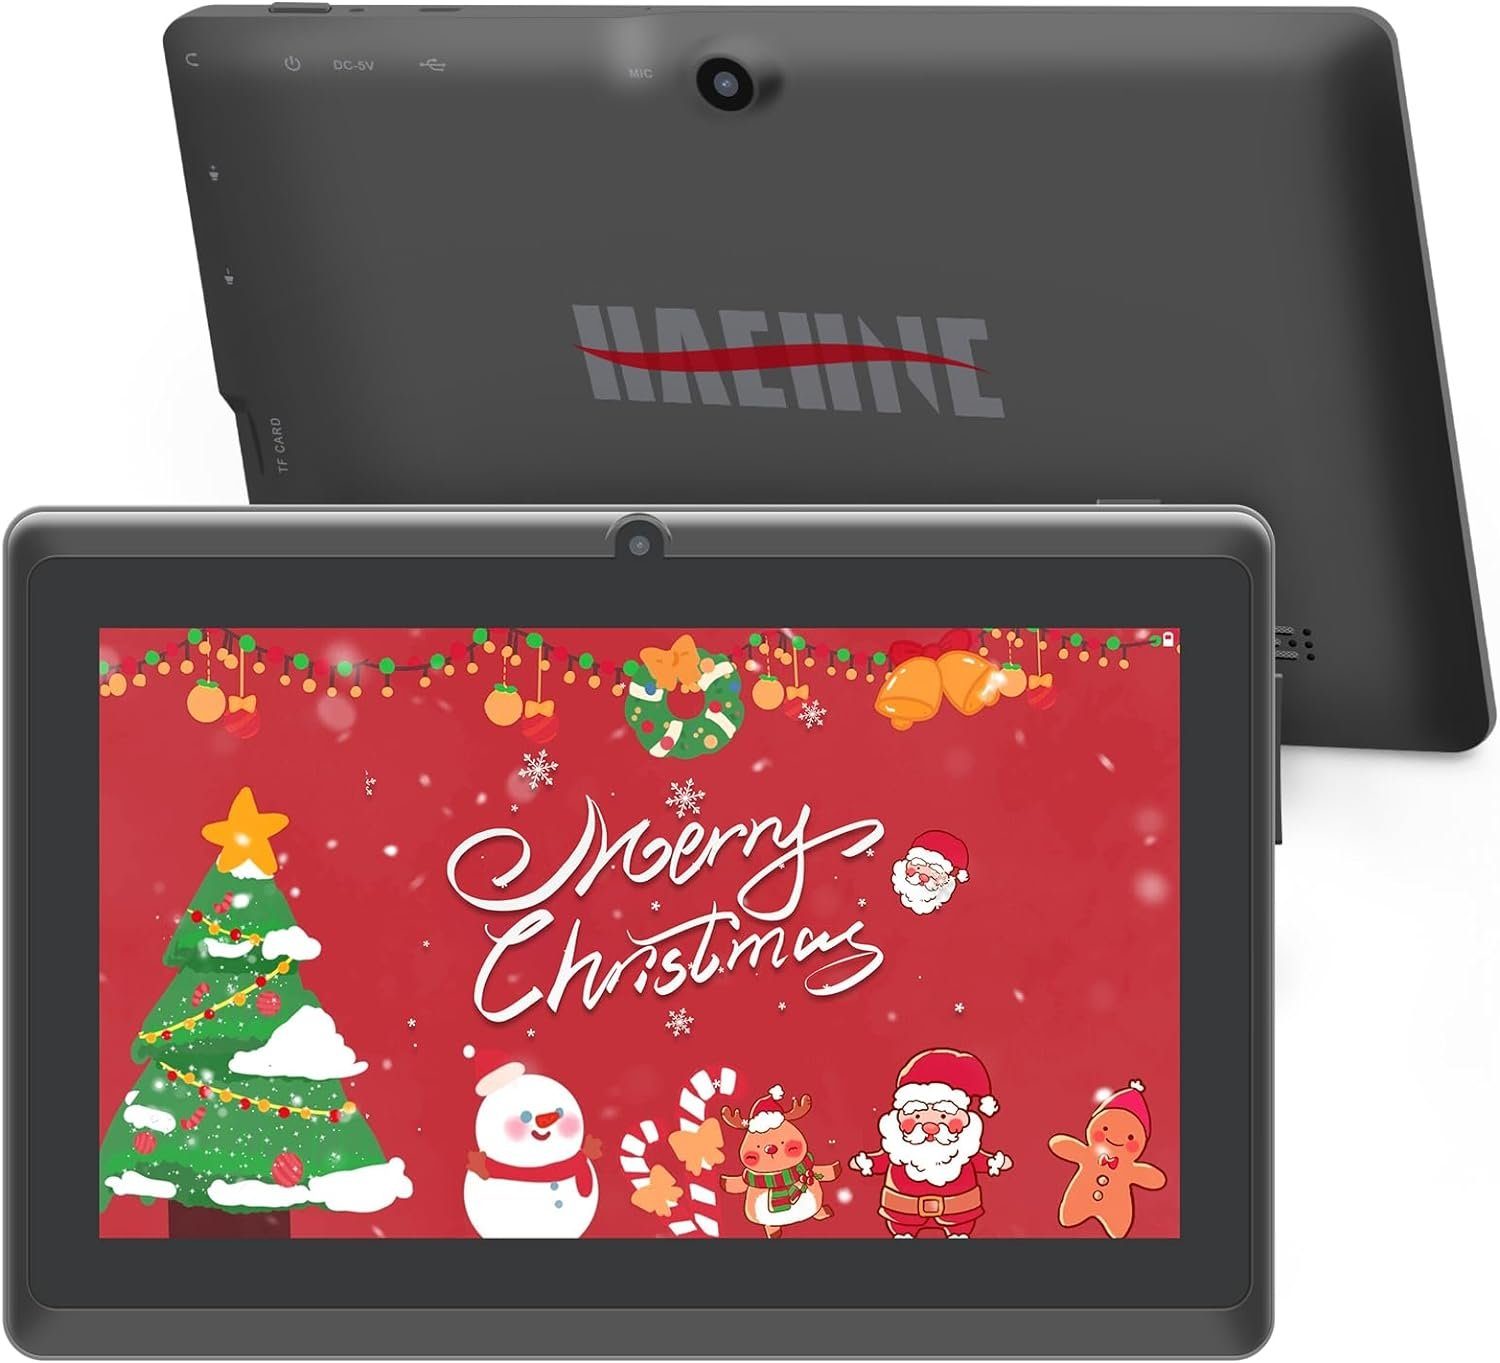 Haehne Q8 Tablet (7", 8 GB, Android 5, 2,4G, Tablet PC Quad Core A33,Dual Kameras, WiFi, Kapazitiven Touchscreen)